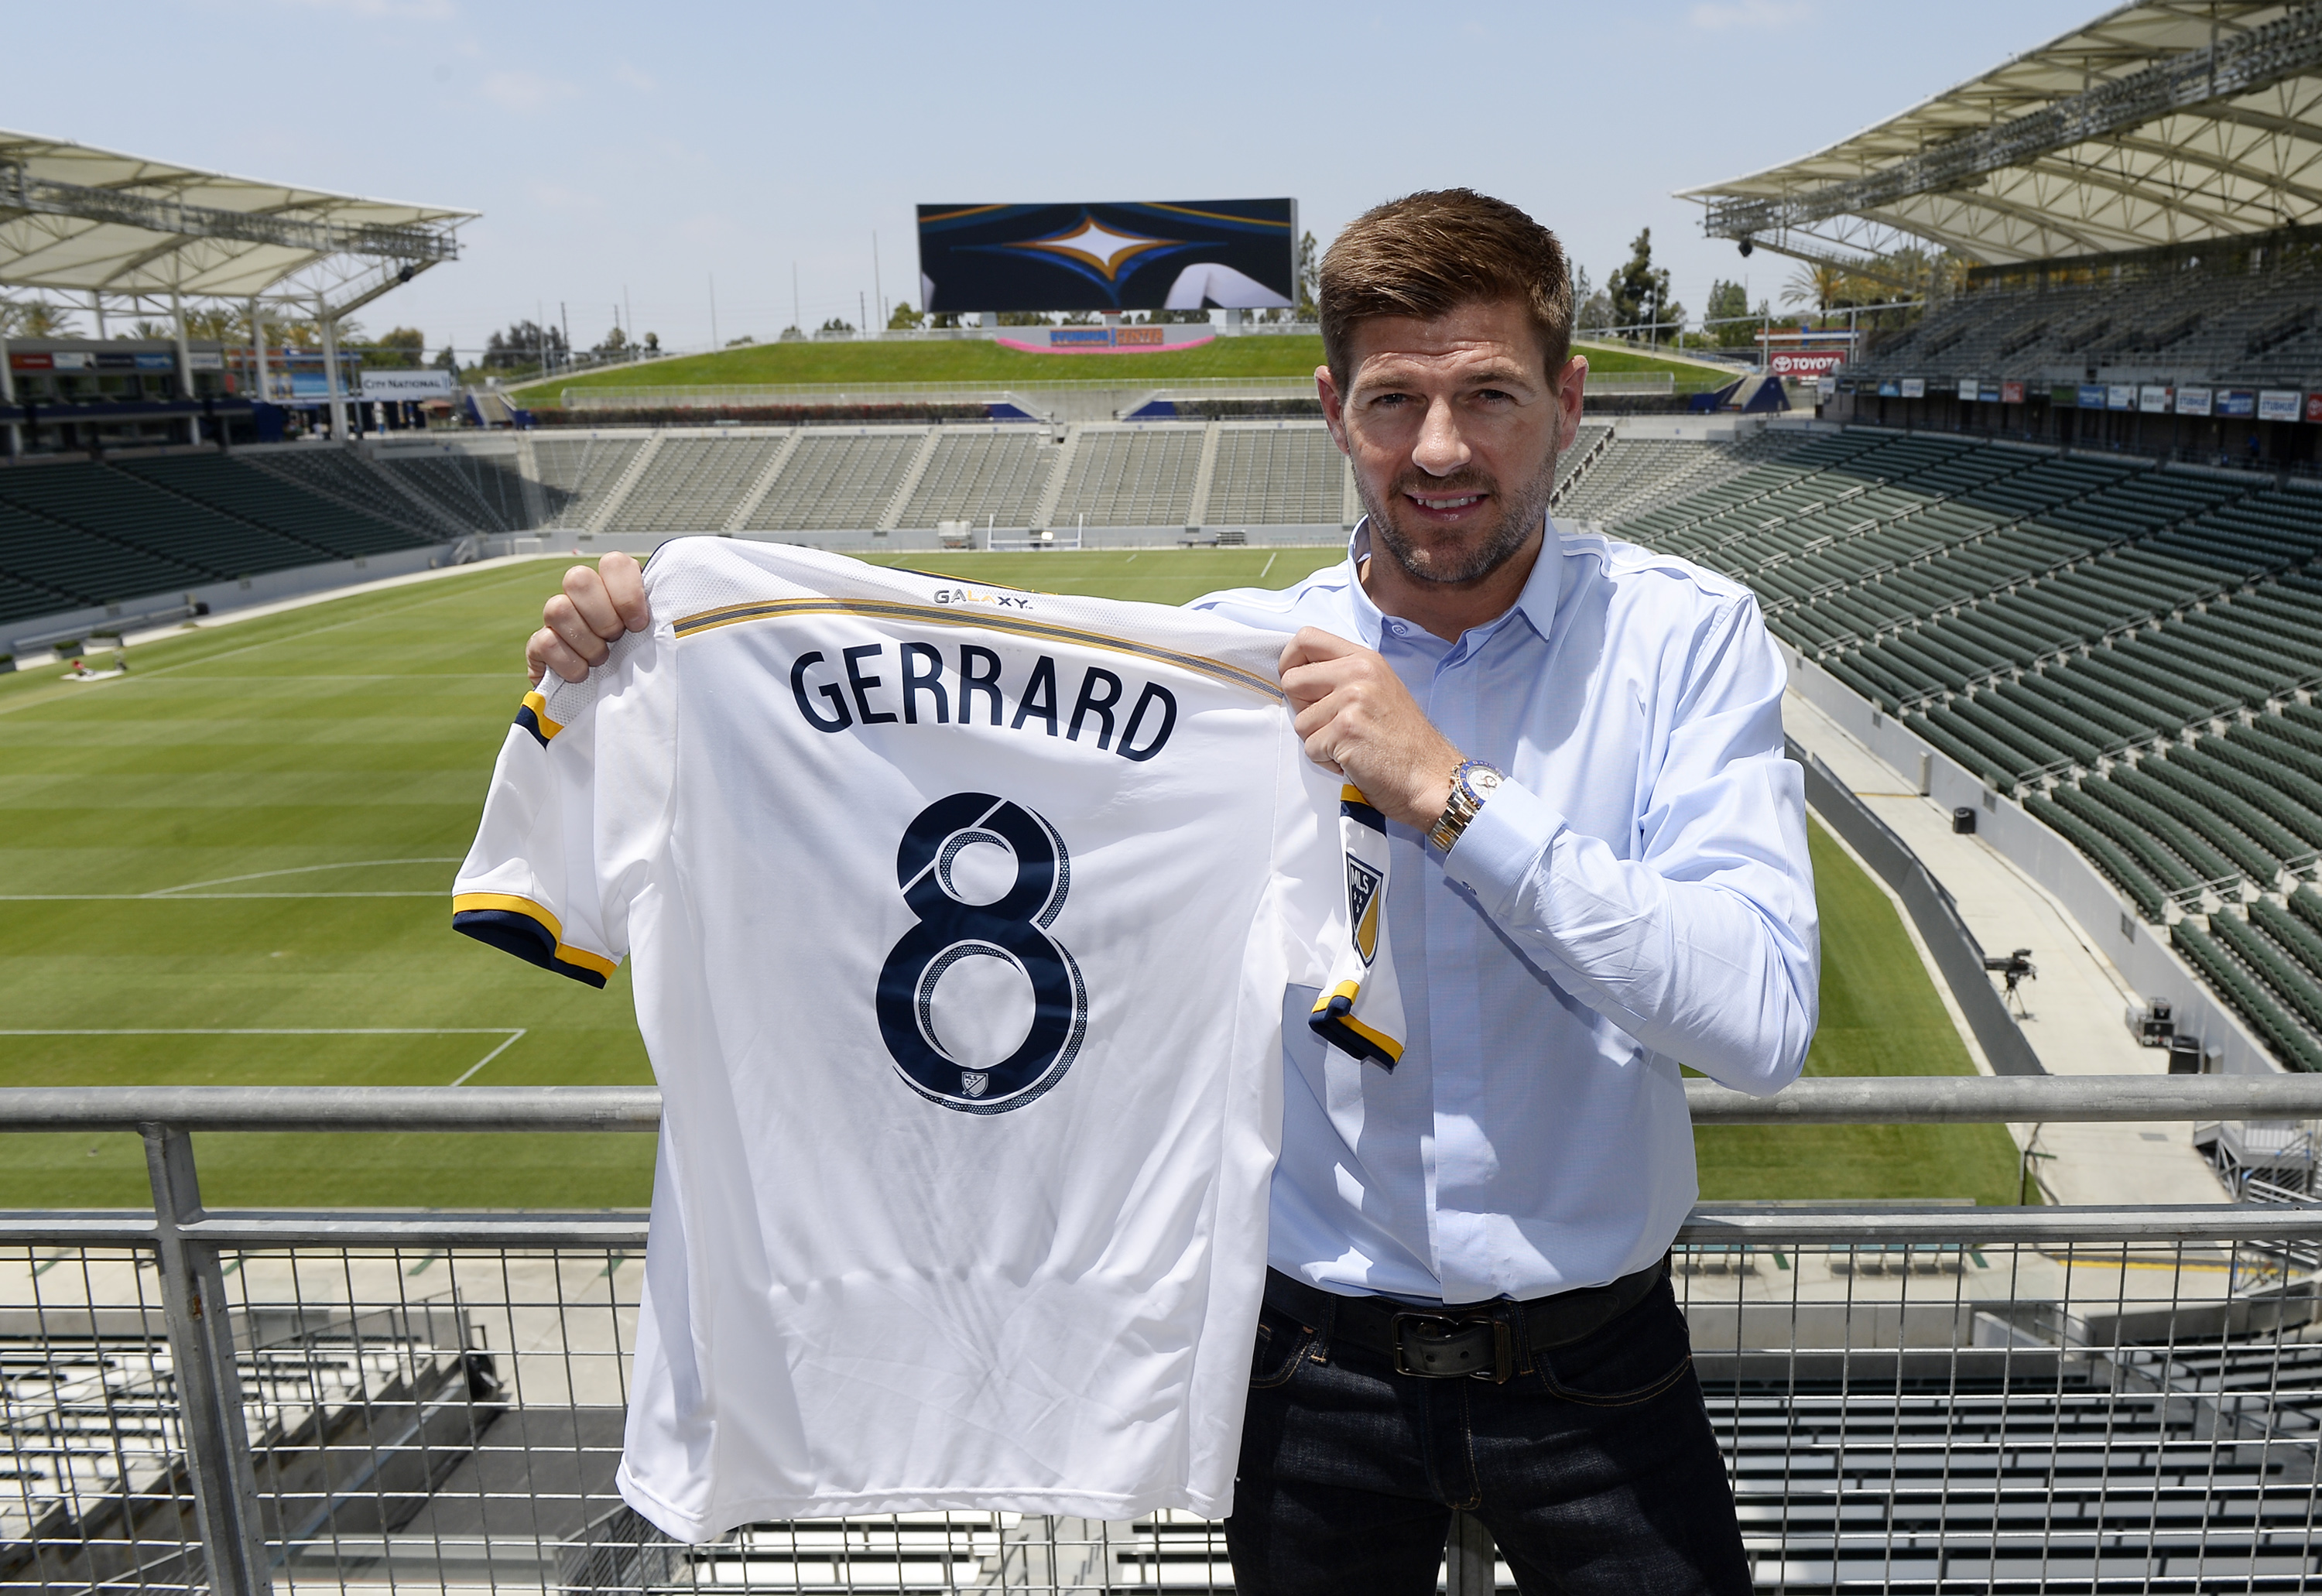 Steven Gerrard wasn’t aware of playing on artificial turf and humidity changes when he joined MLS